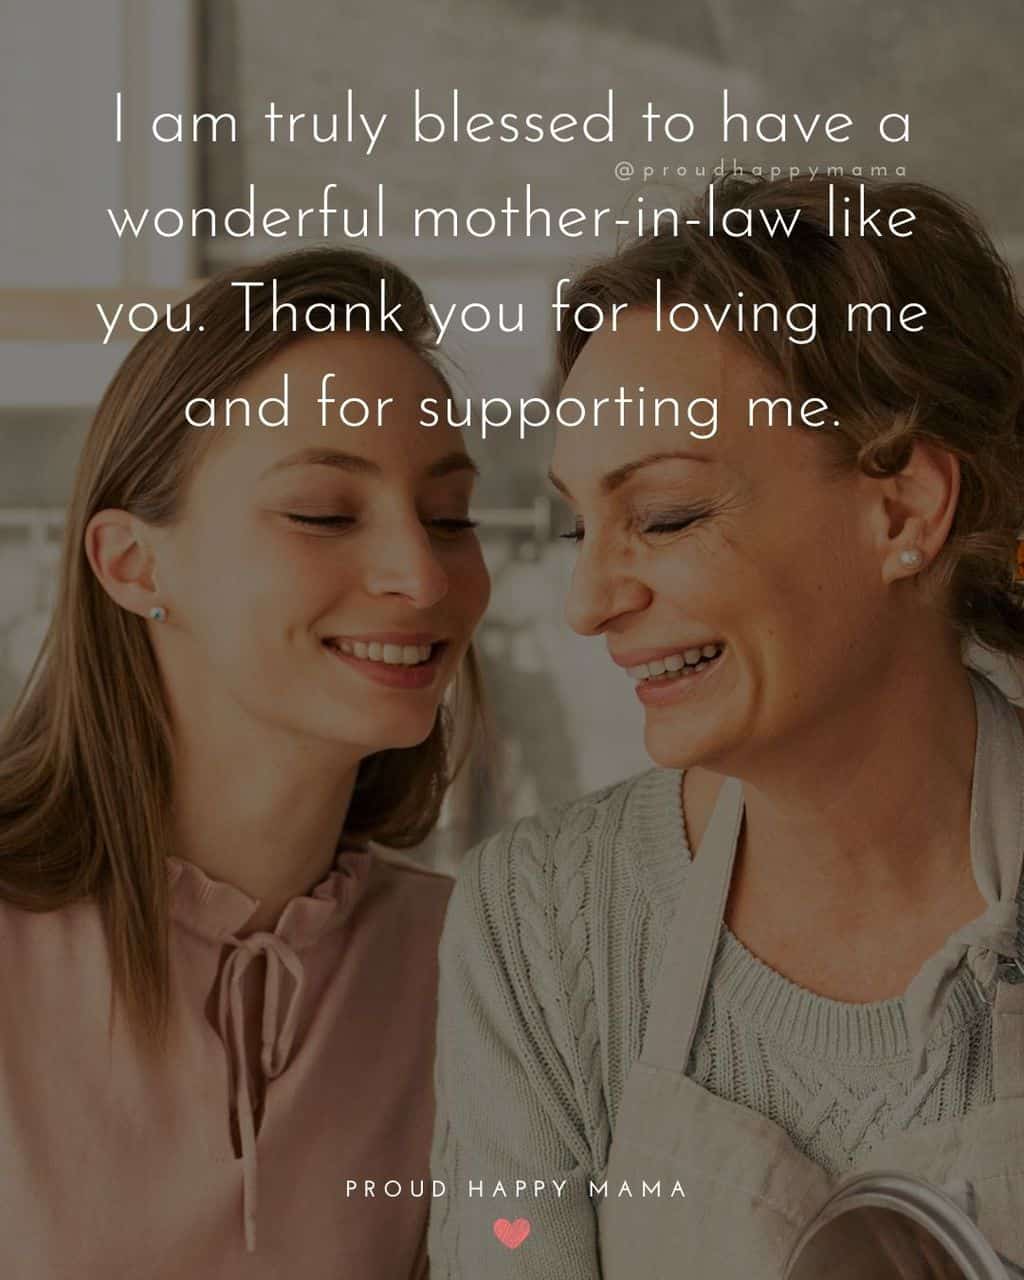 70+ Best Mother In Law Quotes And Sayings [with Images] 71F